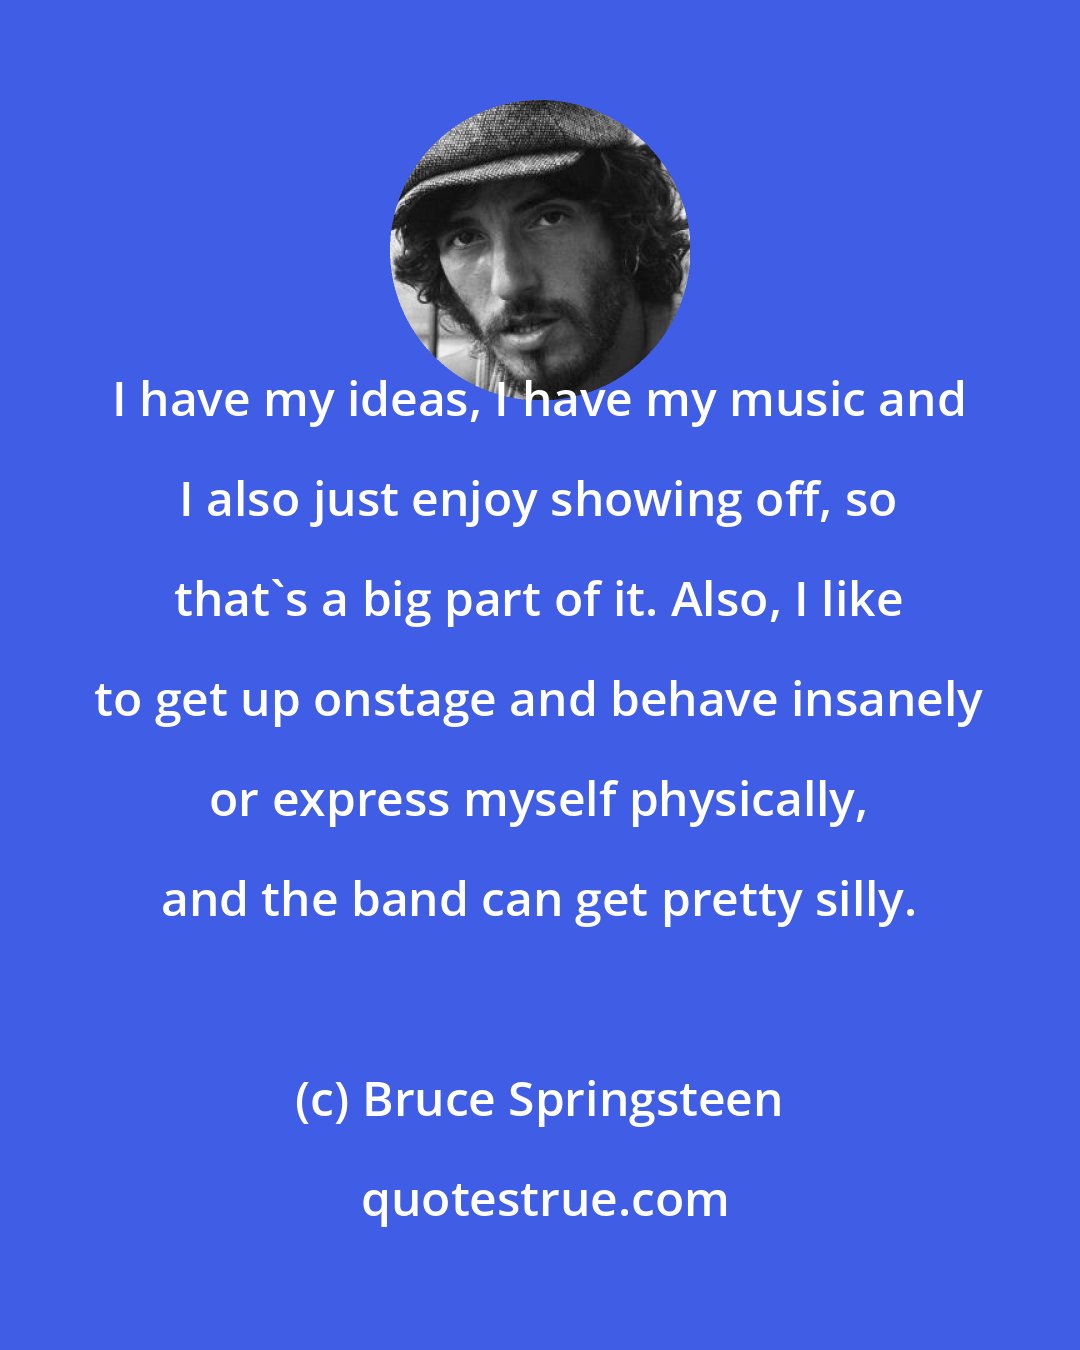 Bruce Springsteen: I have my ideas, I have my music and I also just enjoy showing off, so that's a big part of it. Also, I like to get up onstage and behave insanely or express myself physically, and the band can get pretty silly.